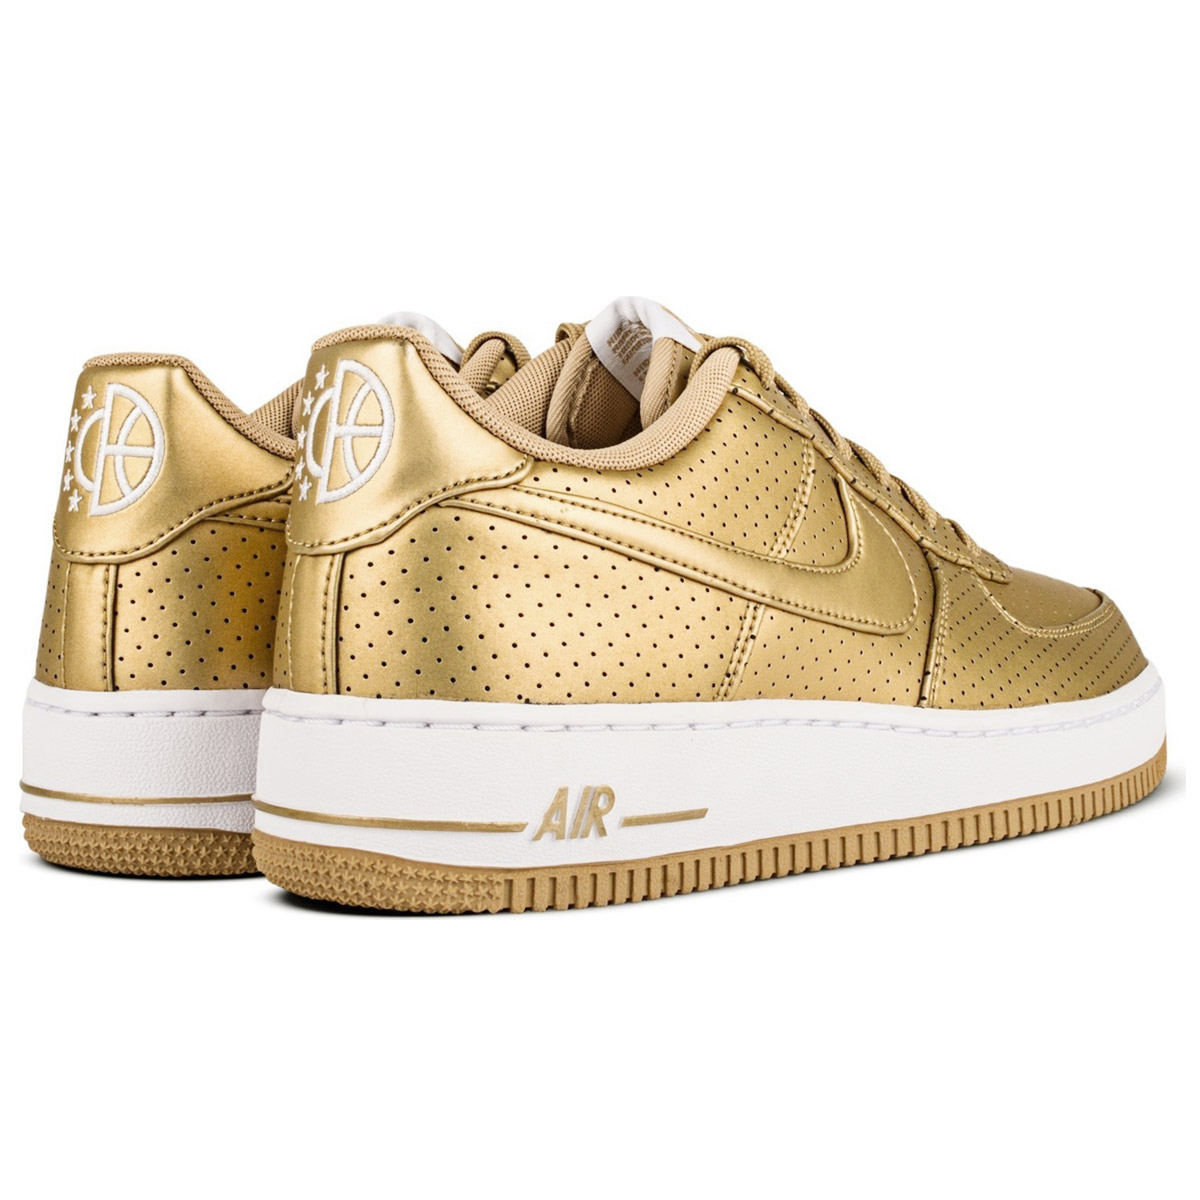 Nike Women Air Force 1 One LV8 GOLD EDITION Shoes Women's Sneakers gym shoe new | eBay